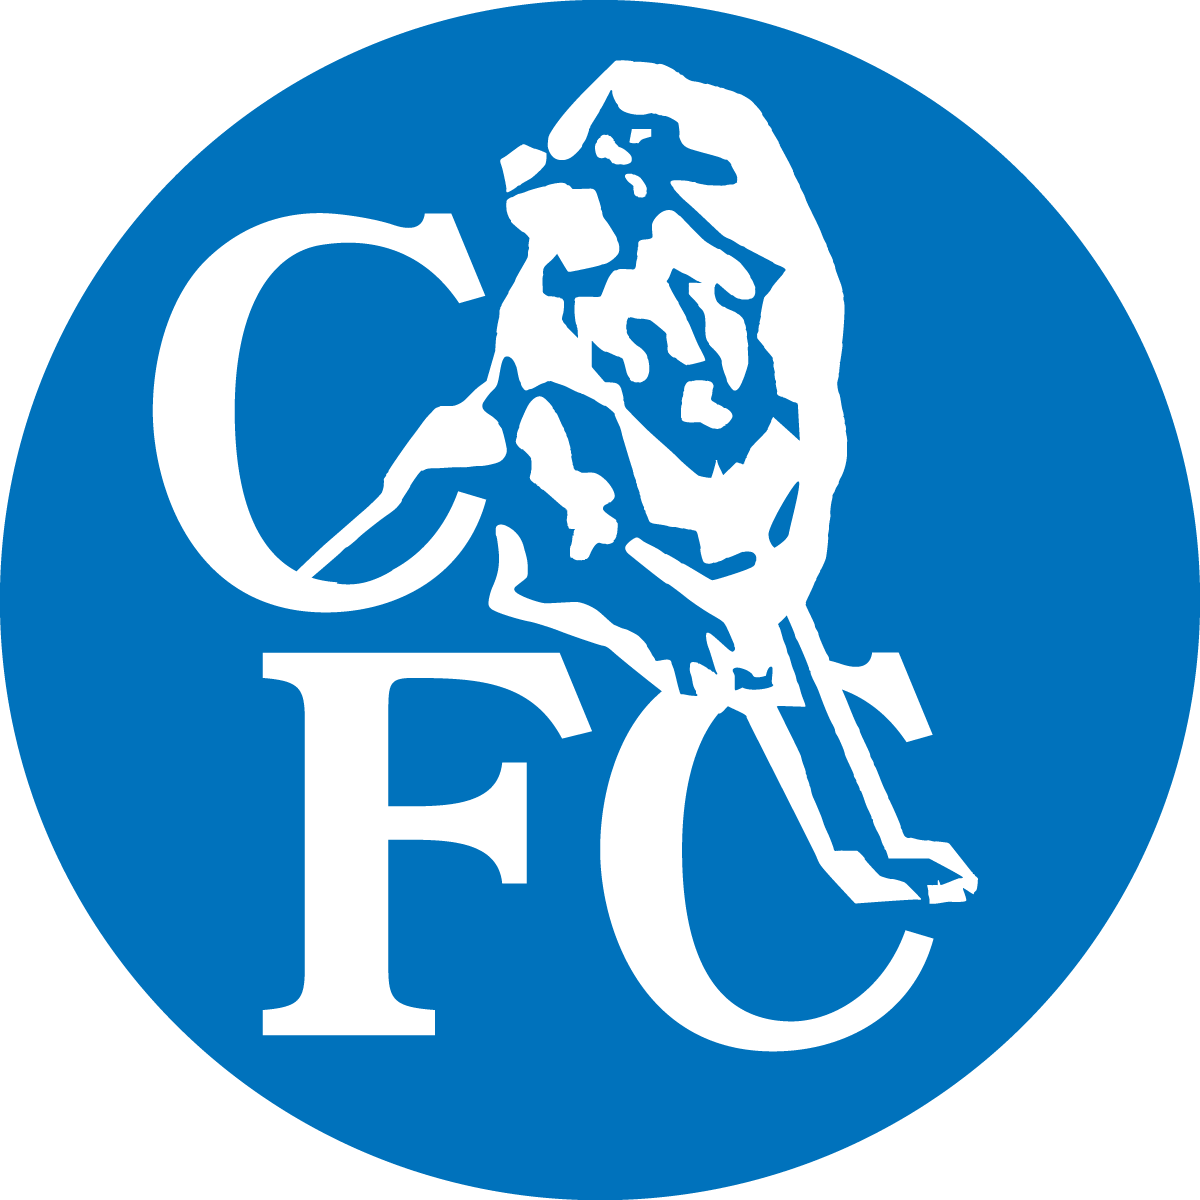 chelsea png image chelsea fc logo white lion blue disc png logopedia fandom powered by wikia 1200